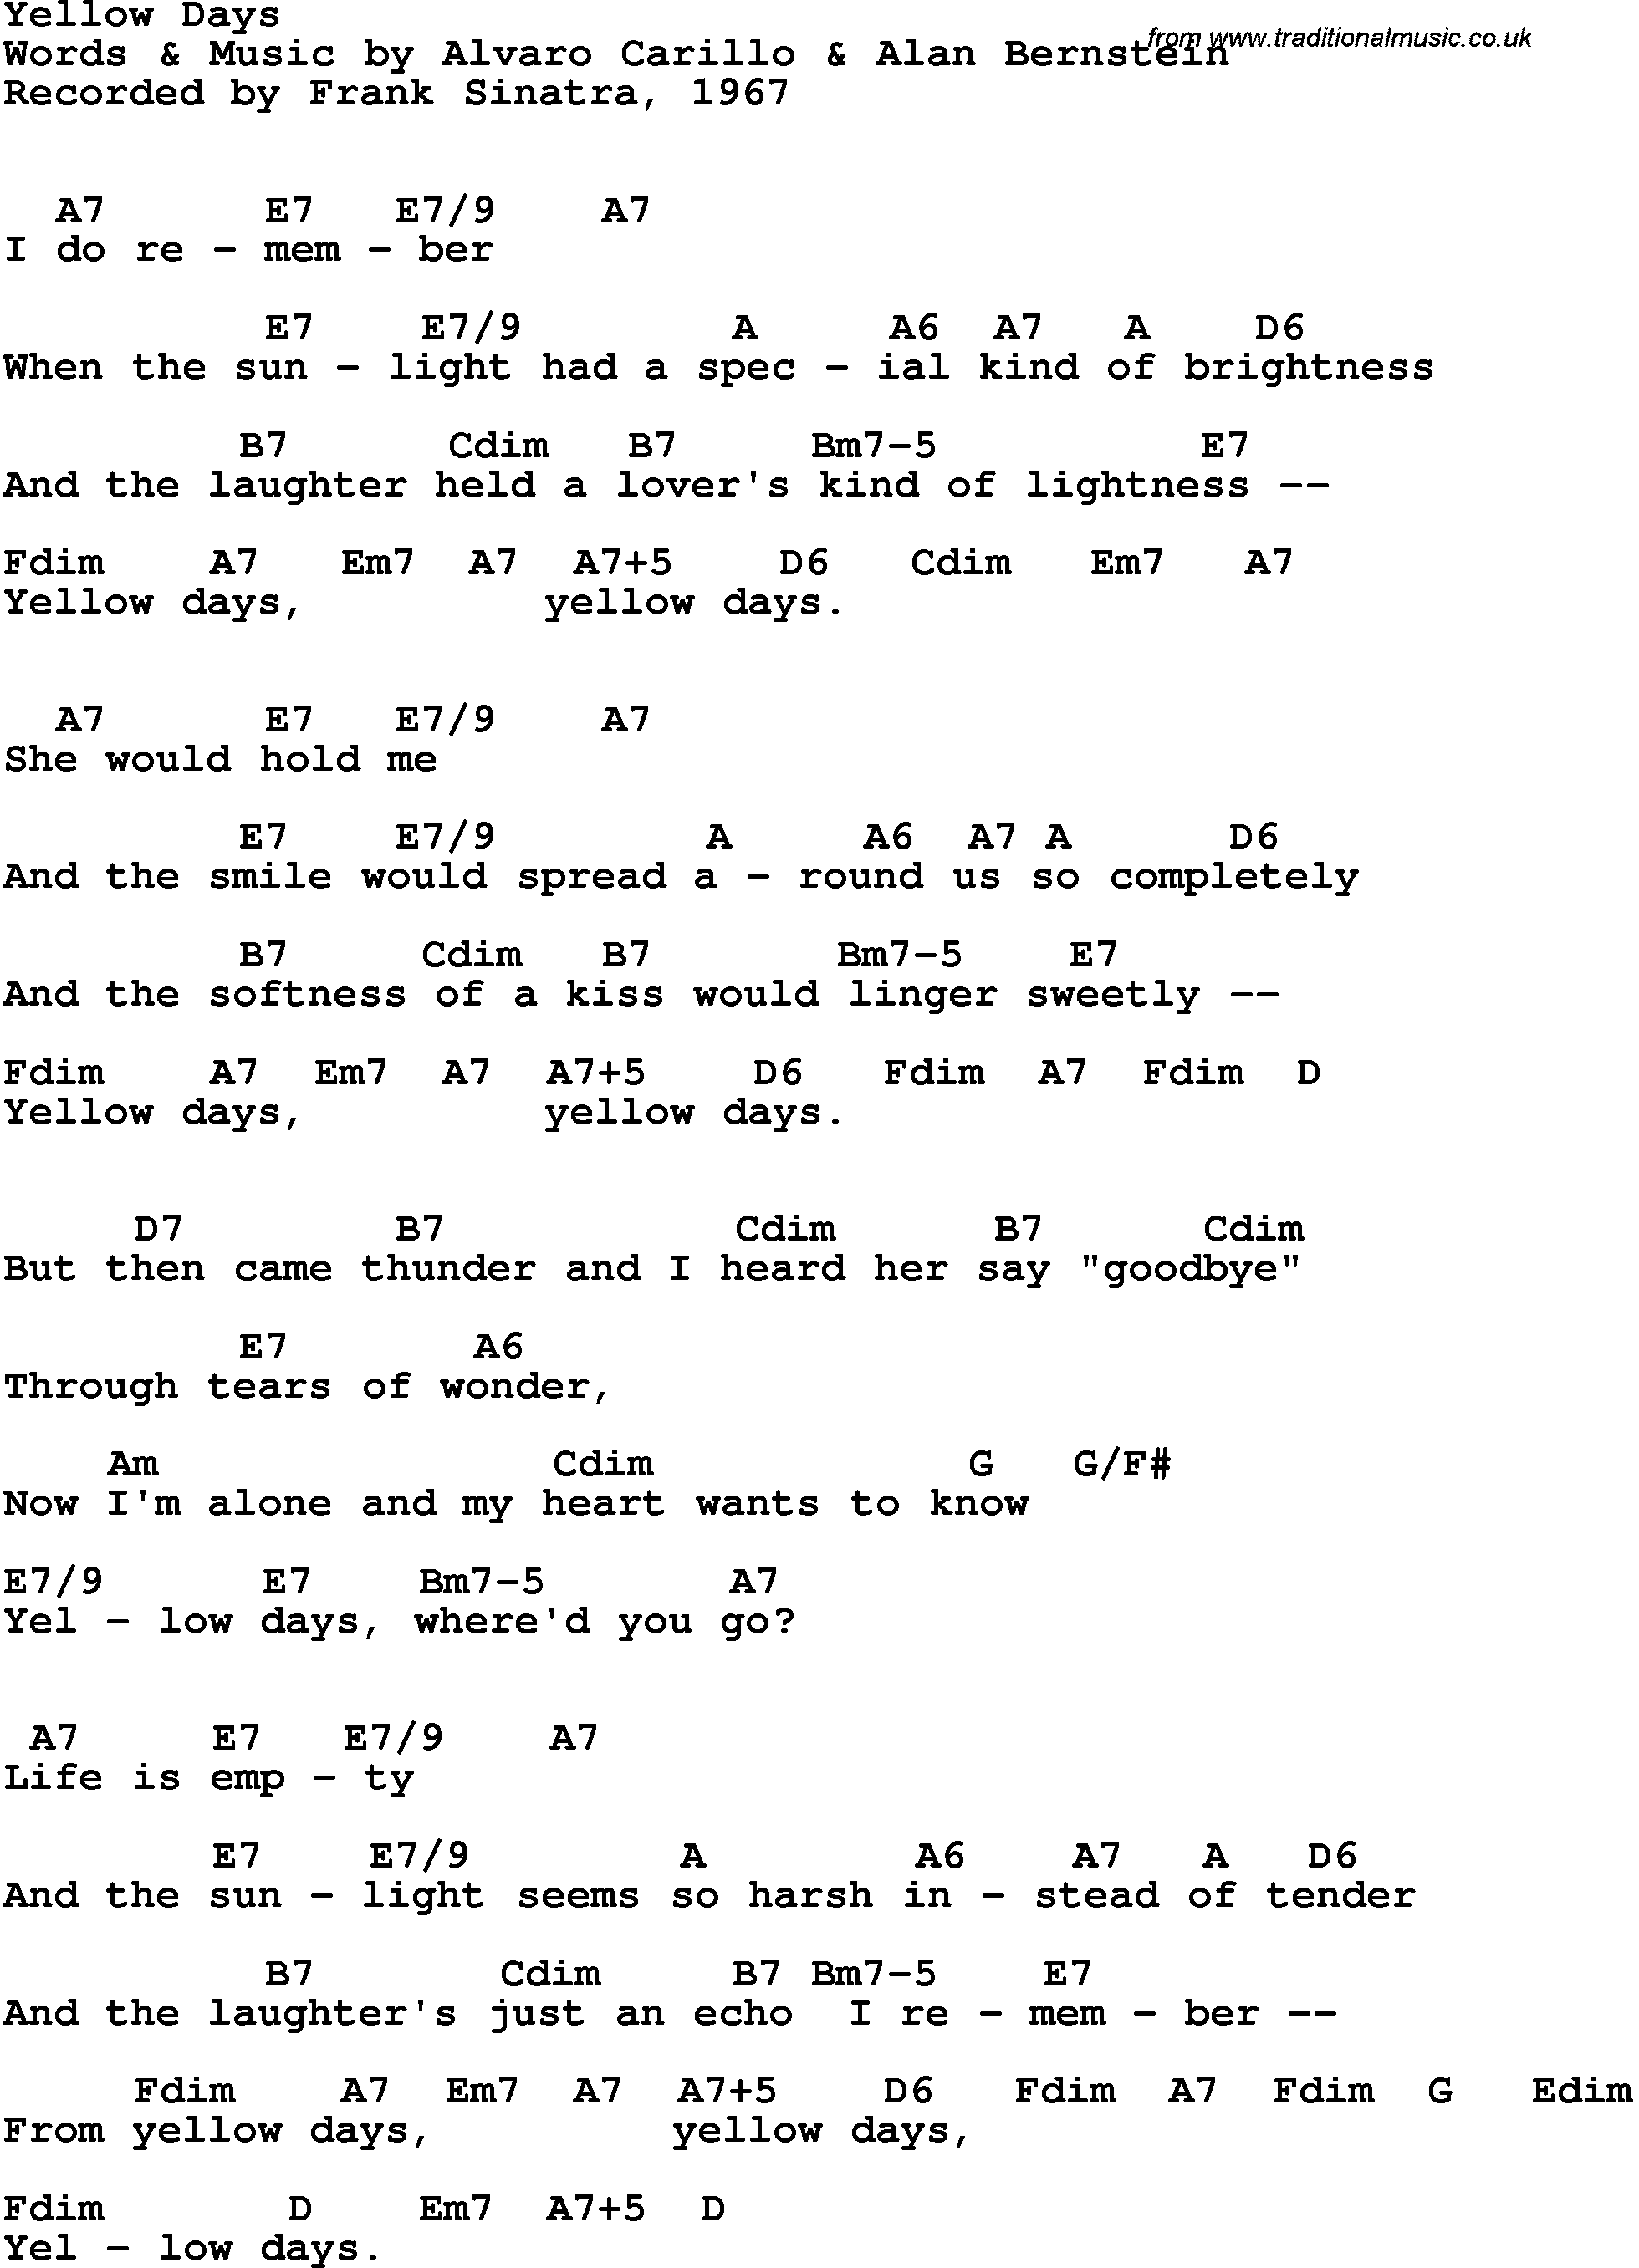 Song Lyrics with guitar chords for Yellow Days - Frank Sinatra, 1967